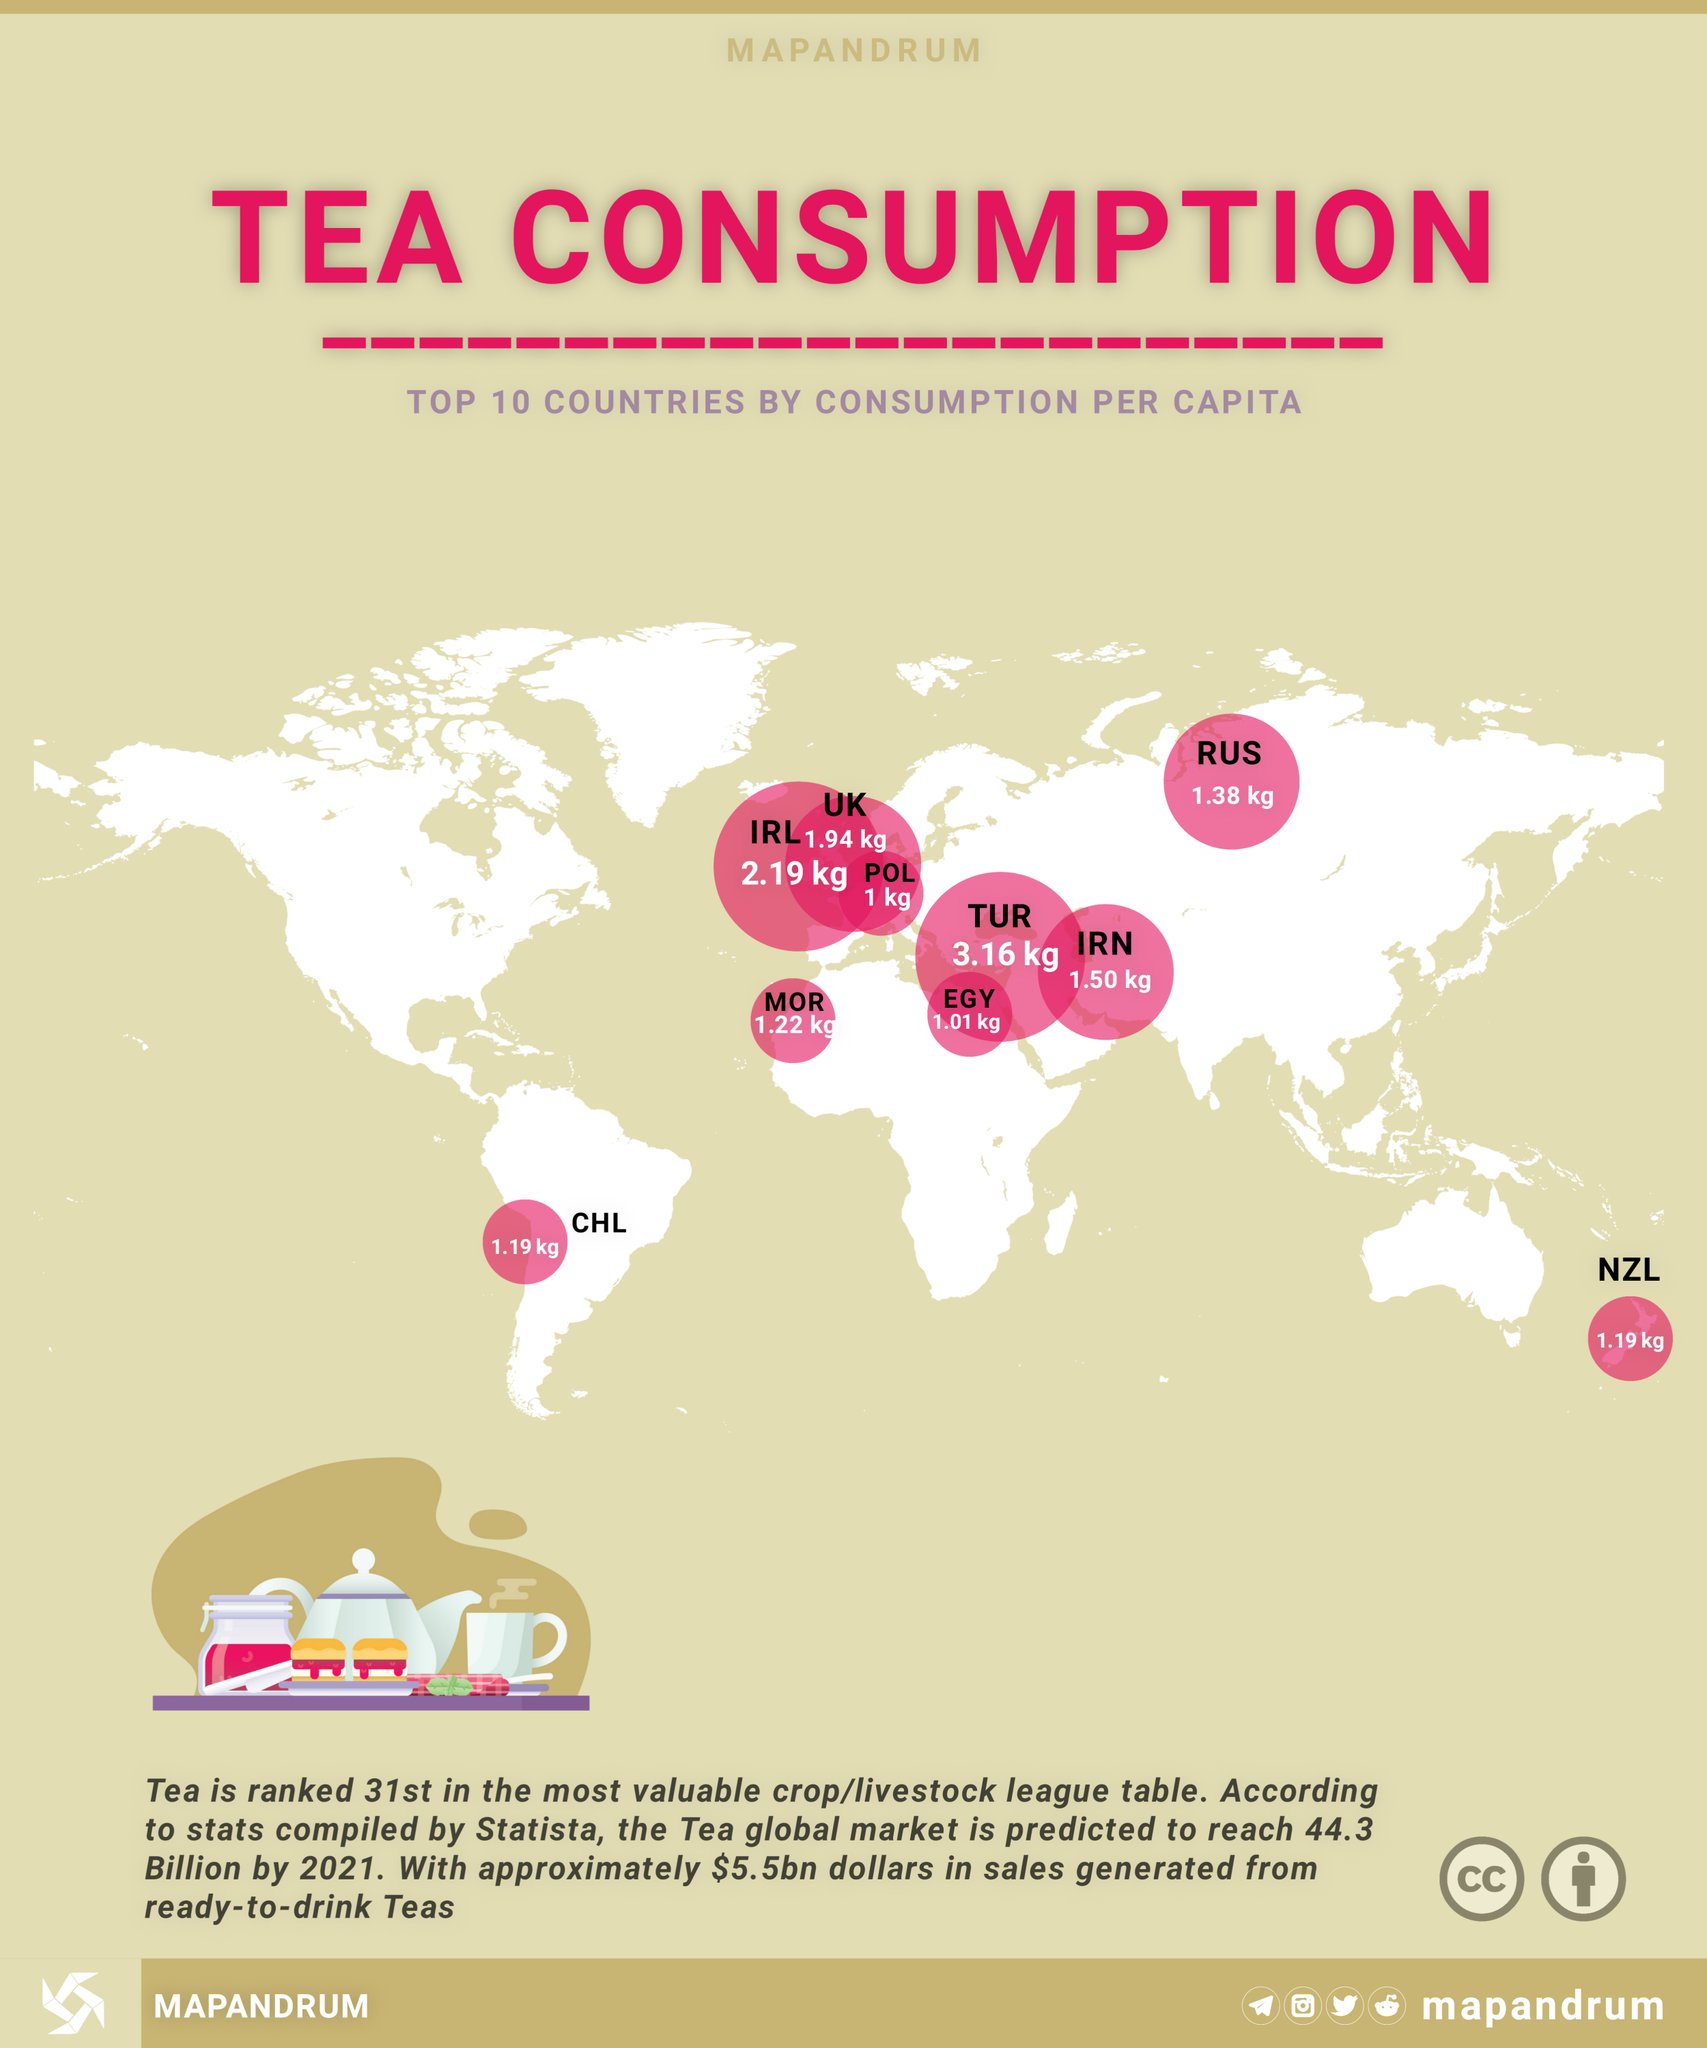 Drinking countries. Tea consumption per Country. Tea consumption Statistic Country. Страна самым большим потреблением чая. Top Countries consumption of Tea per habitant.